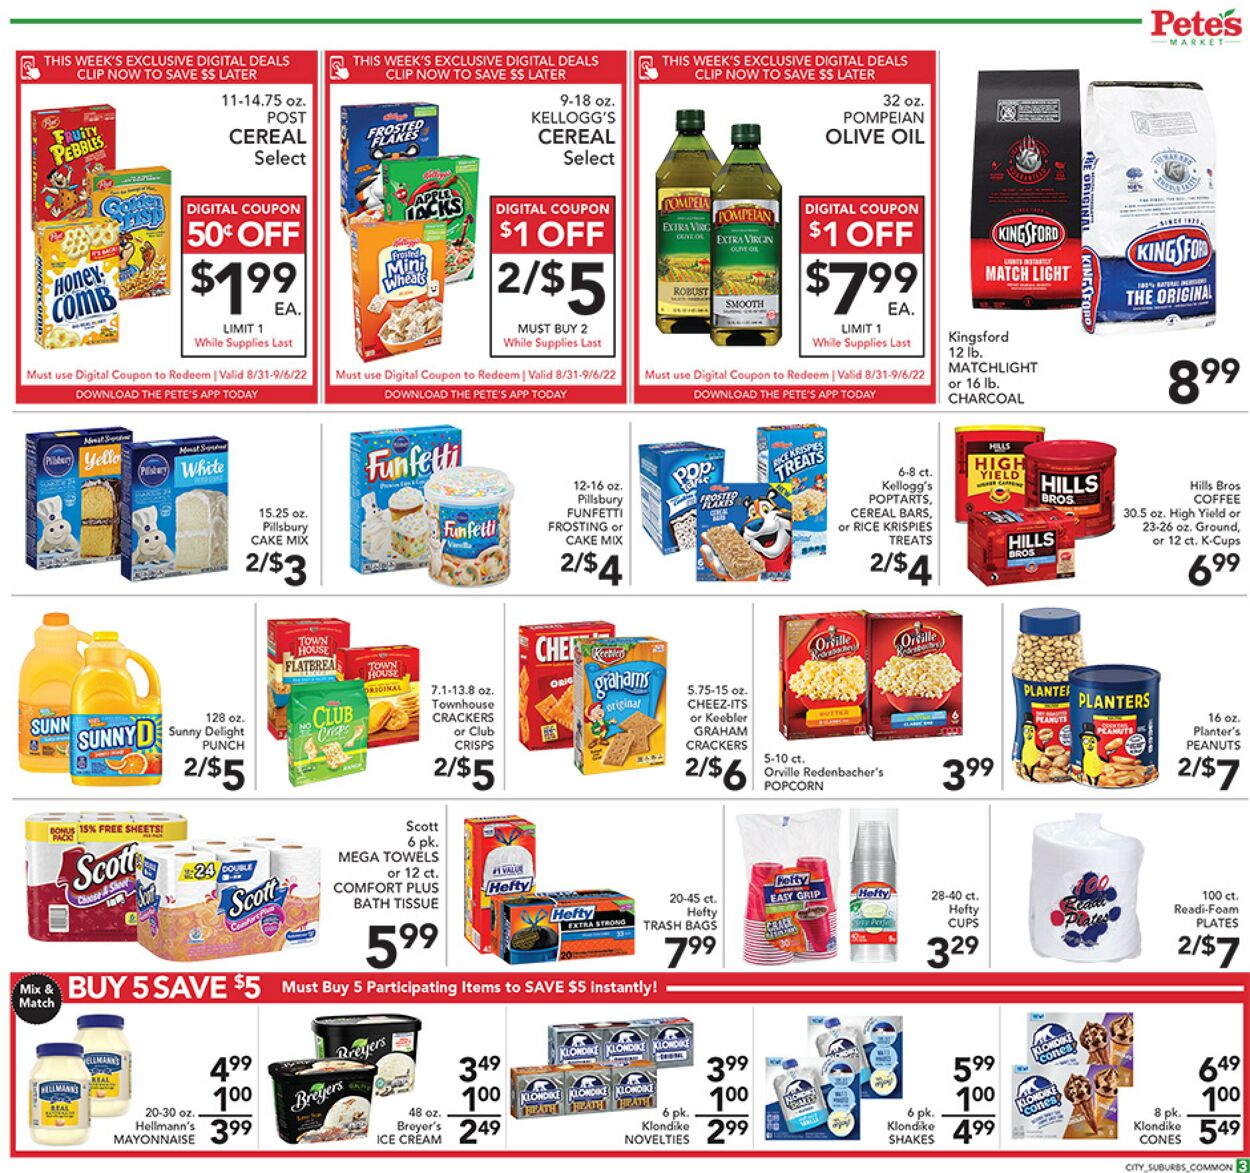 Weekly ad Pete's Fresh Market 08/31/2022 - 09/06/2022